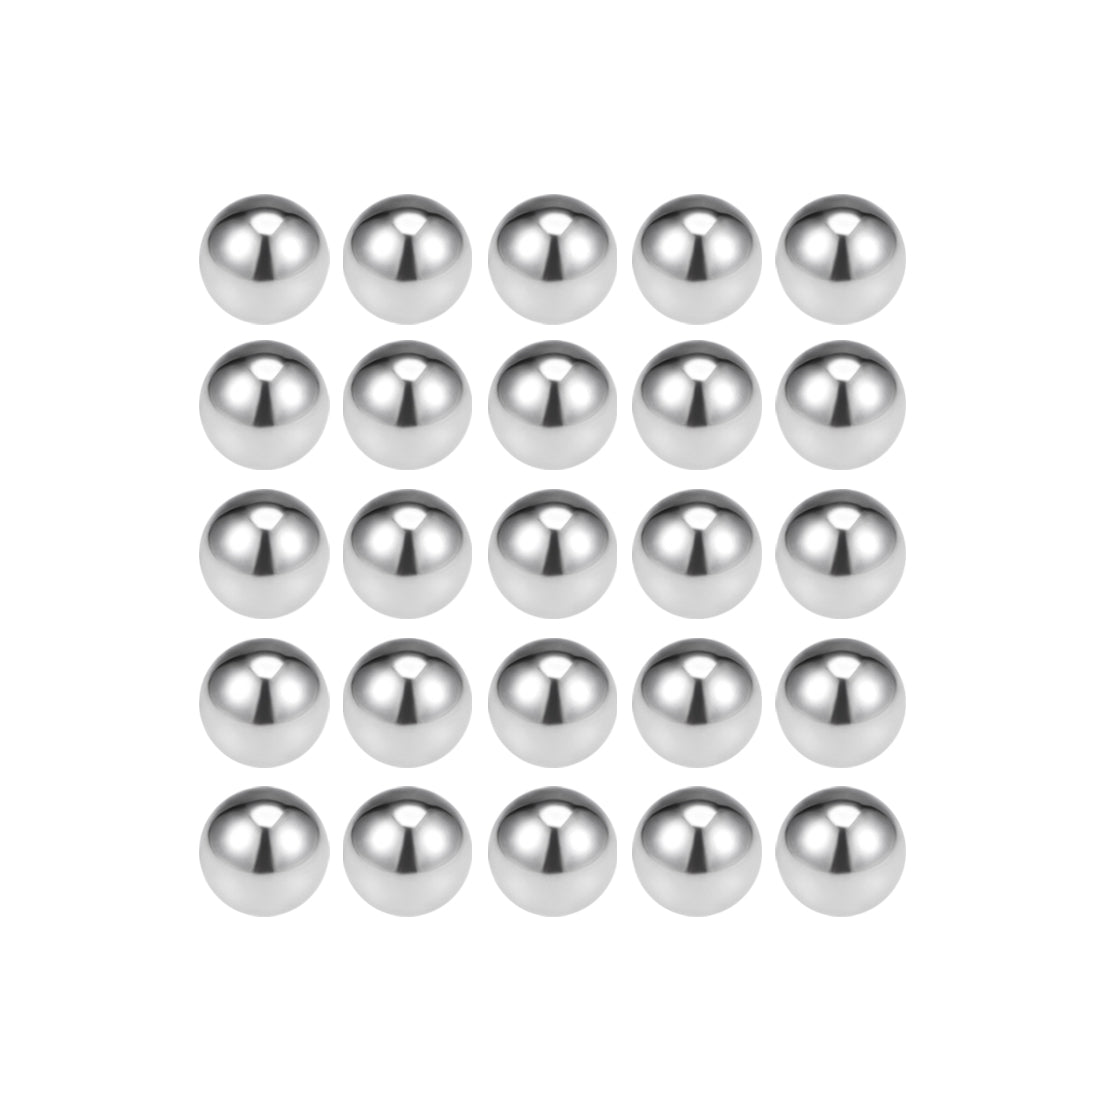 Uxcell Uxcell 3/8-inch Bearing Balls 304 Stainless Steel G100 Precision Balls 25pcs